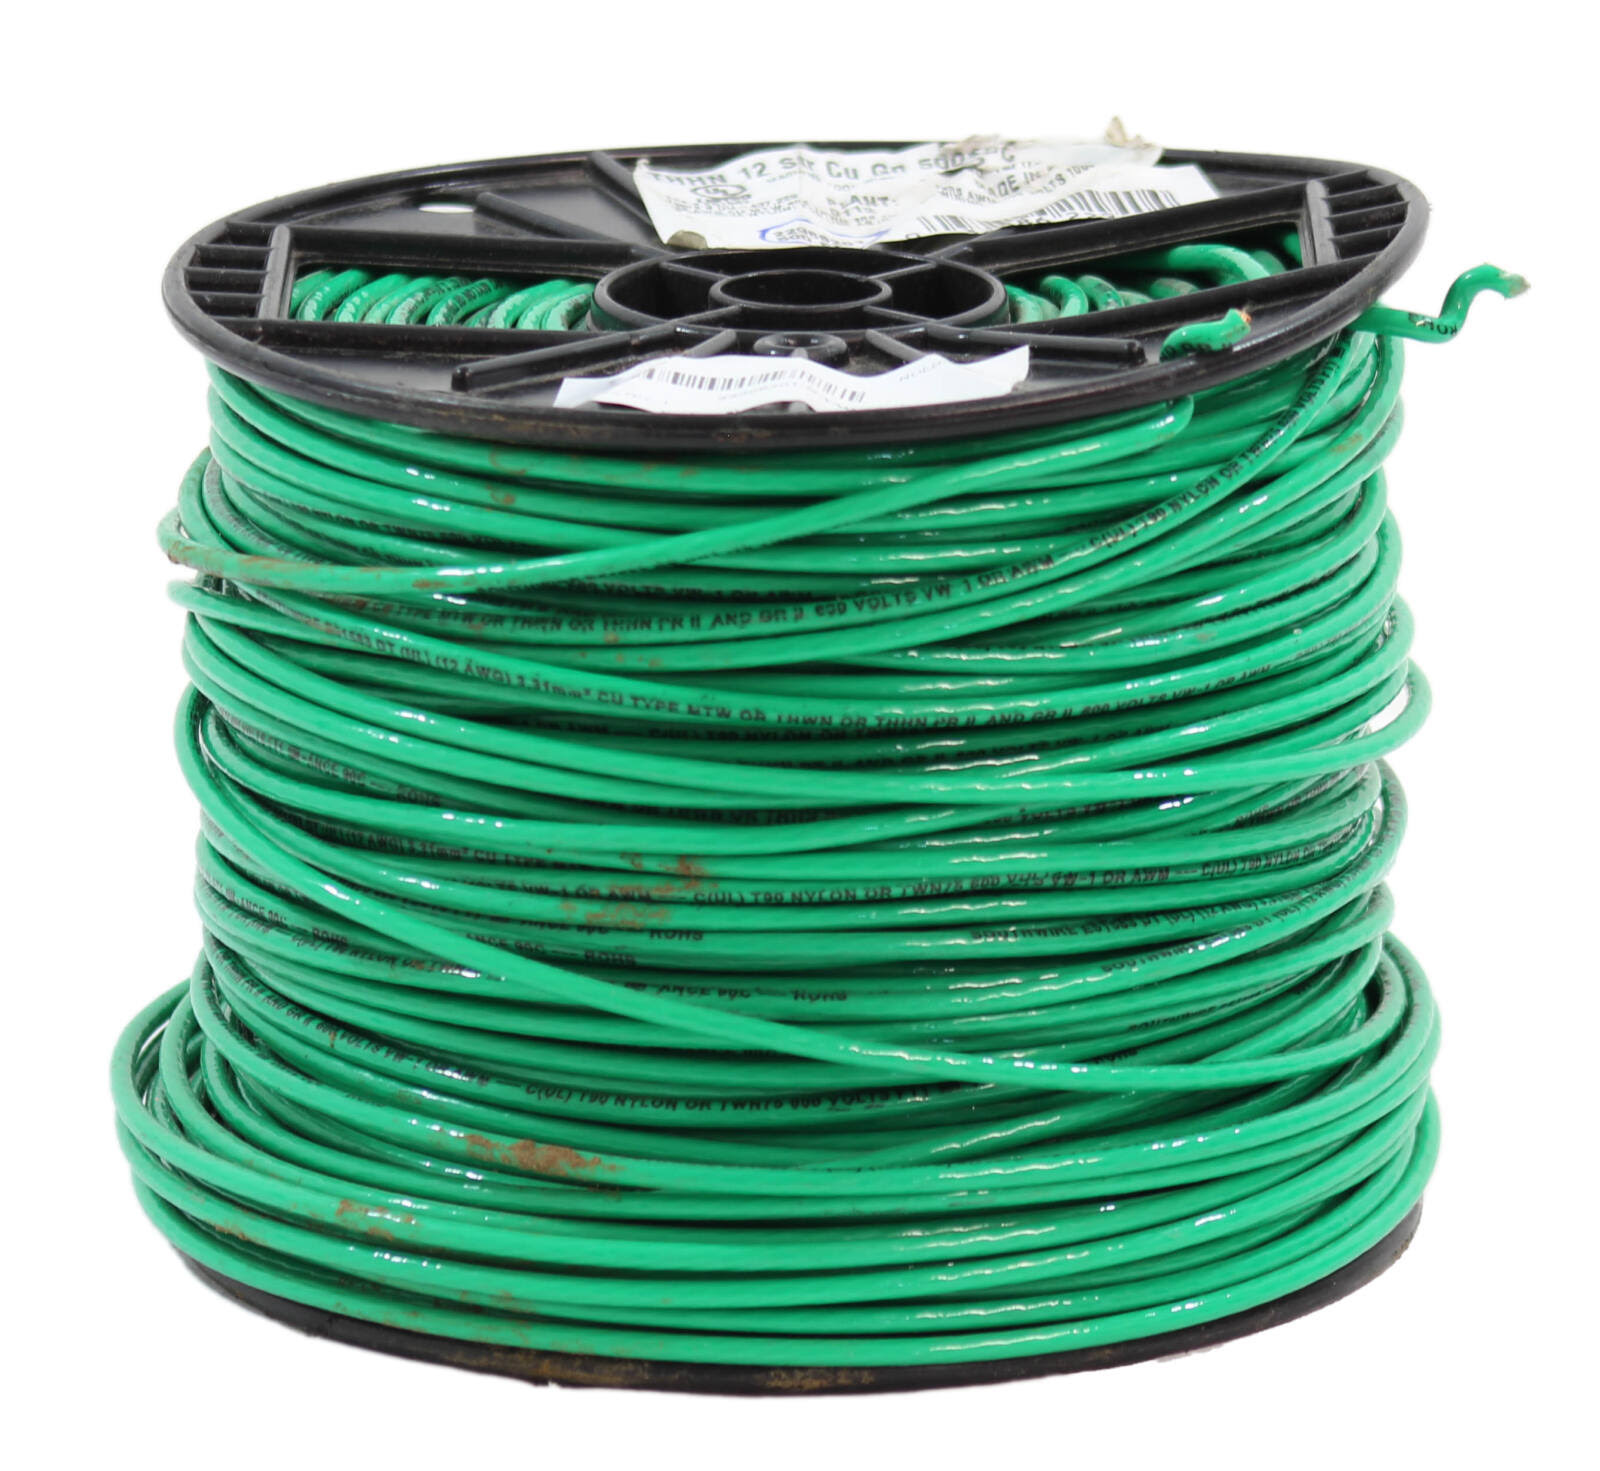 Southwire Stranded Single Building Wire - 12 Awg, 500'